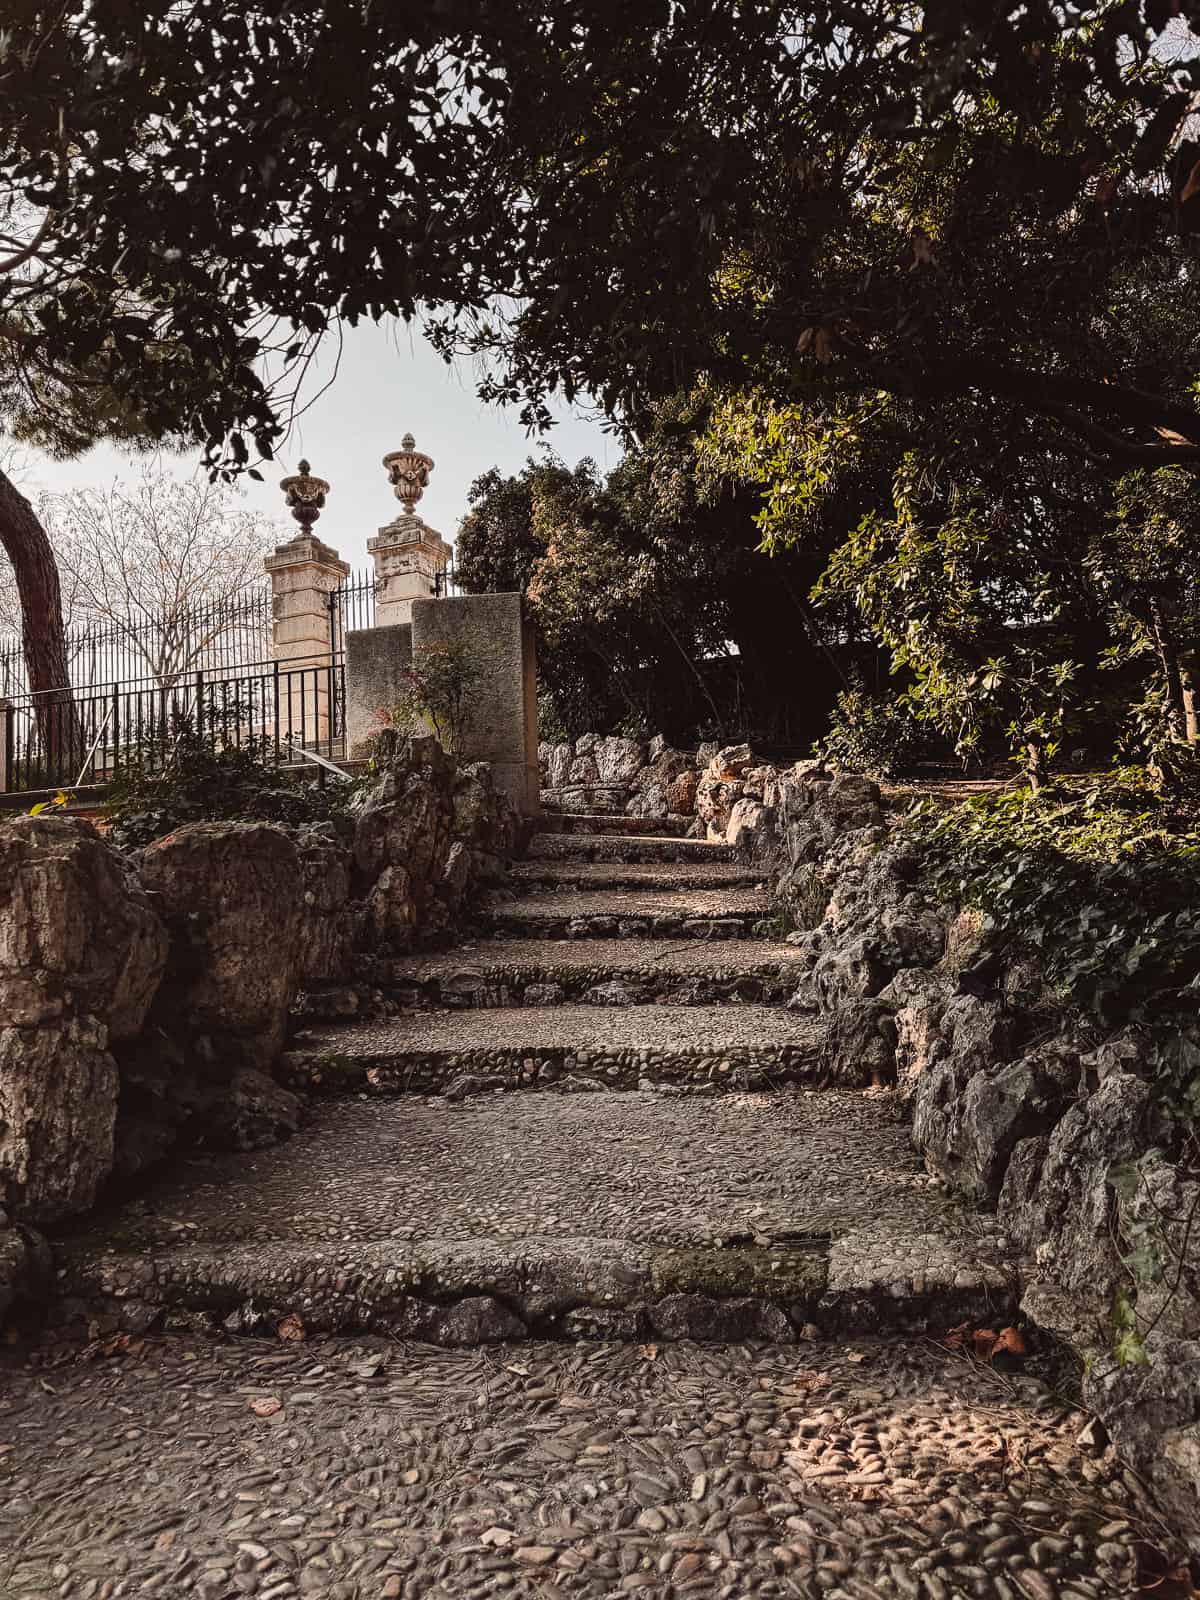 A serene and rustic stone staircase leading through a leafy garden with mature trees, glimpses of ornate fencing, and classical stone finials, suggesting a quiet retreat within a Madrid park.